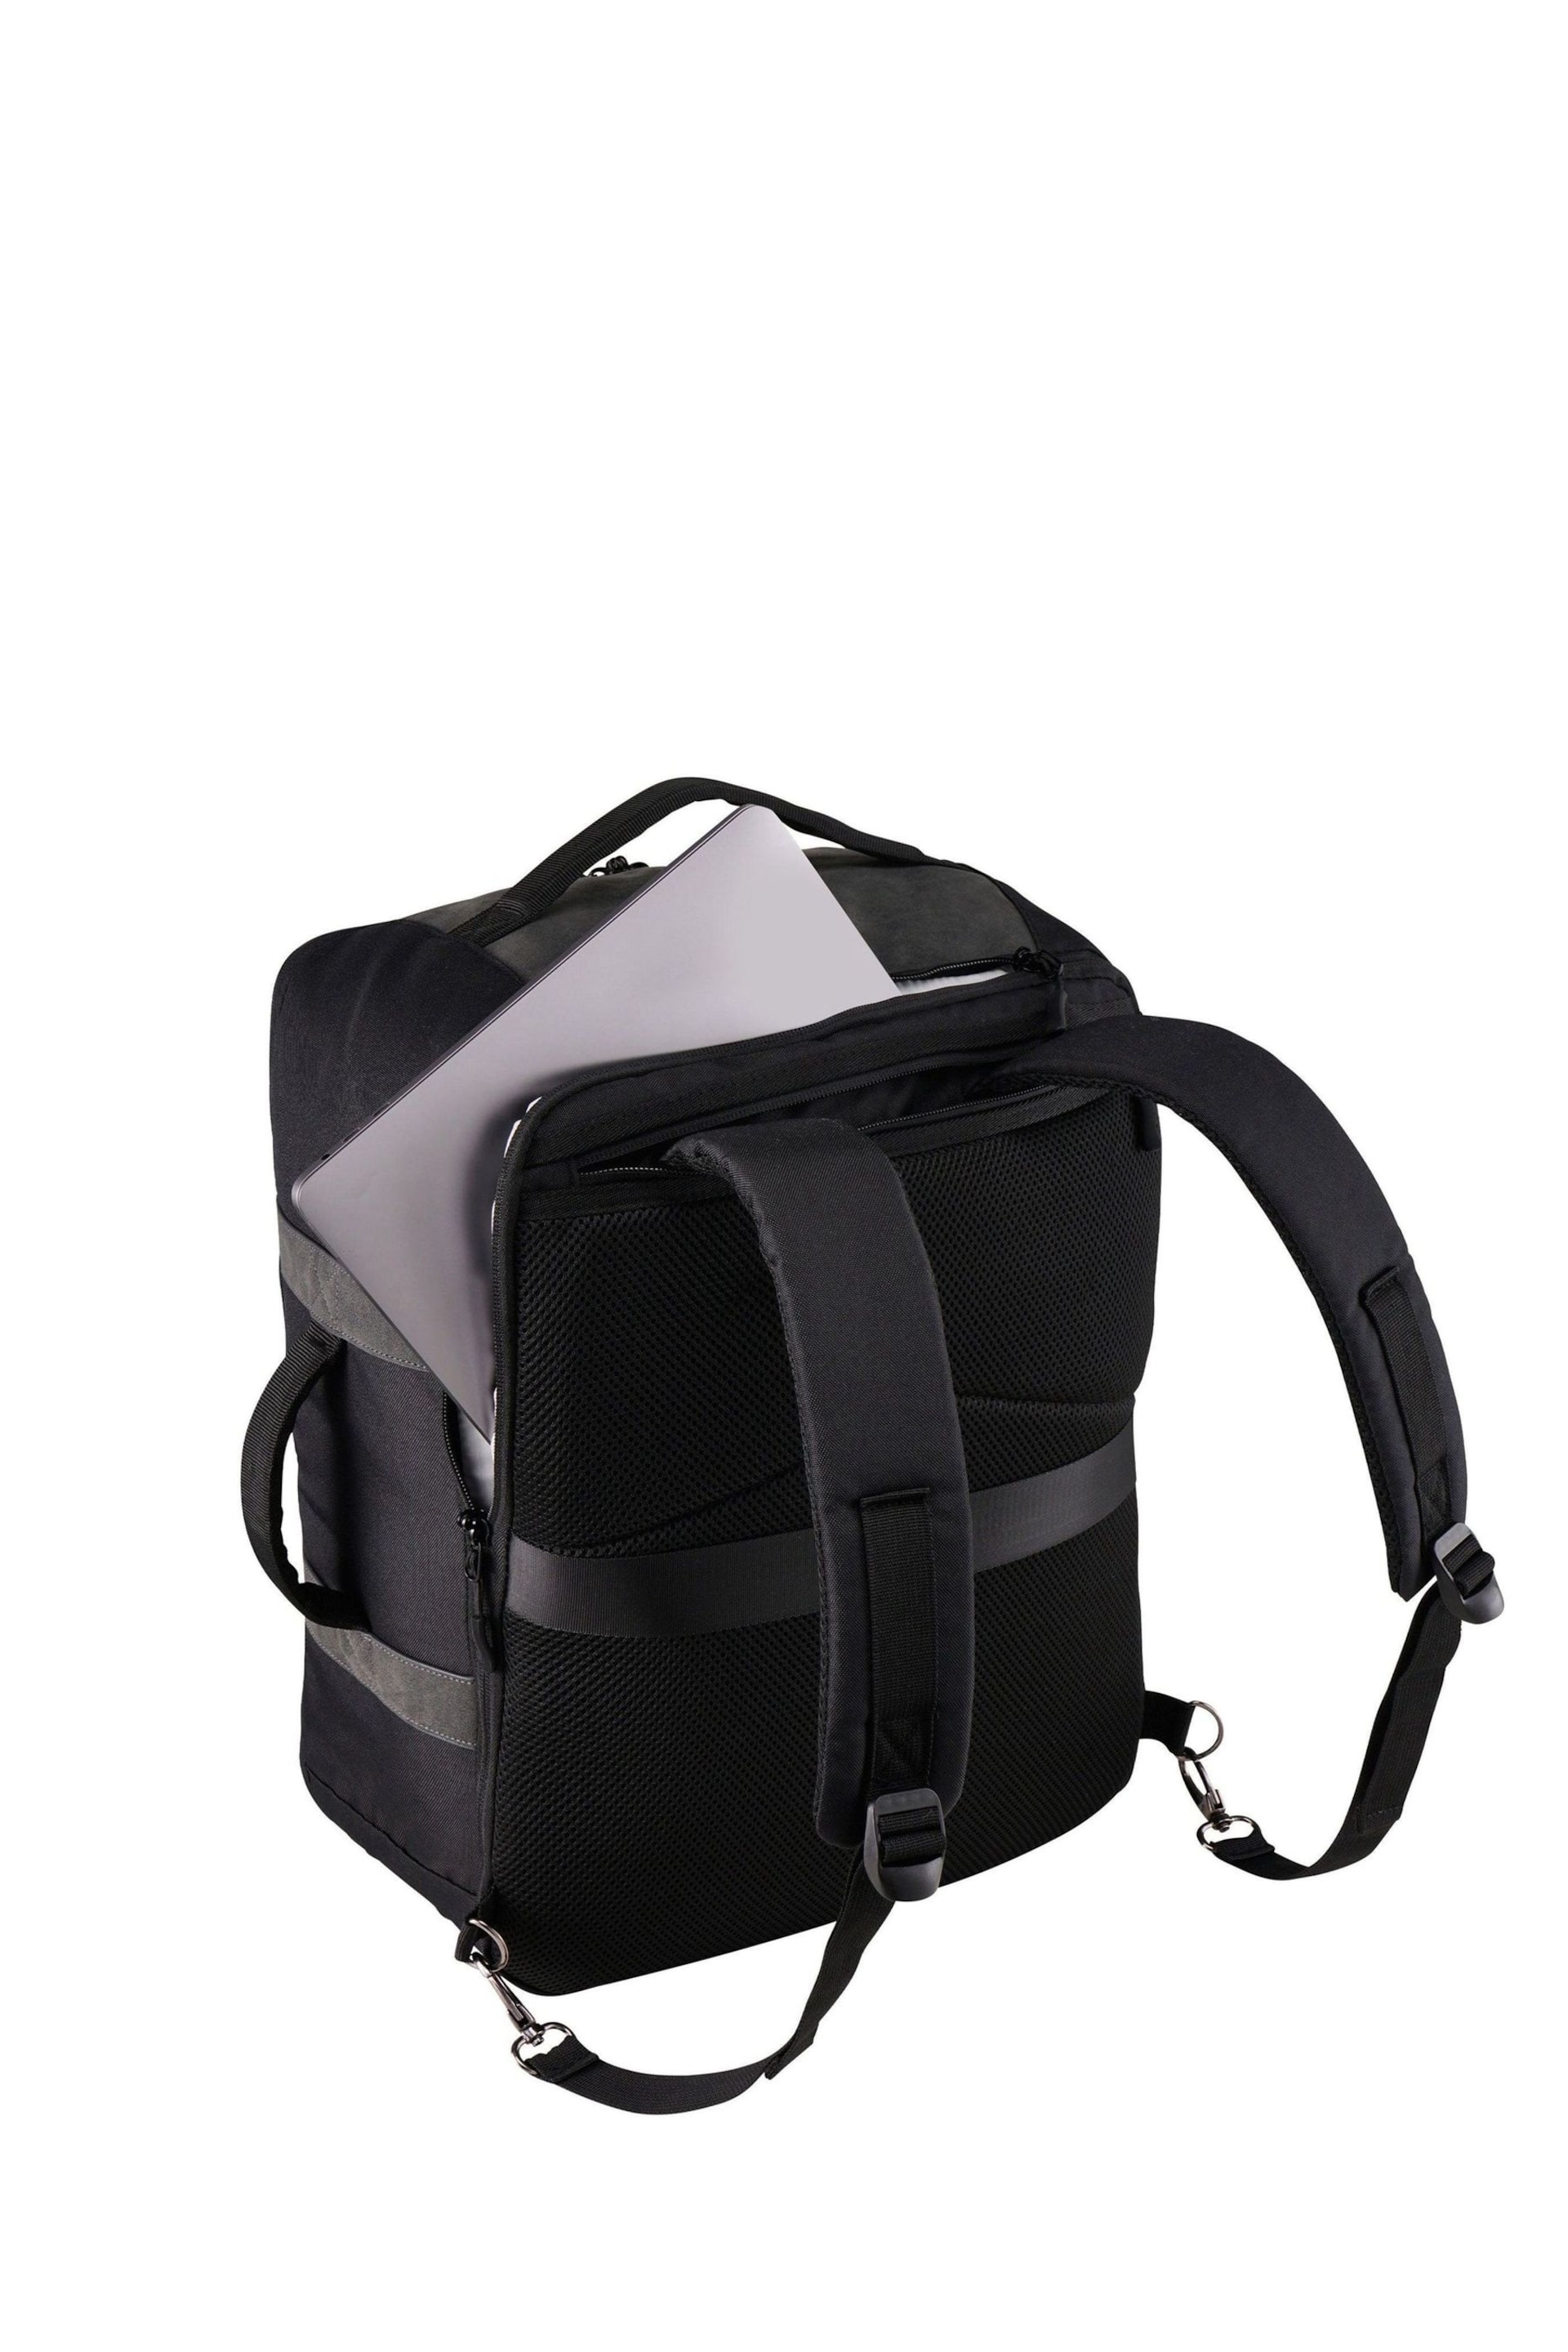 Cabin Max Manhattan 40cm Underseat 20 Litre Travel Backpack - Image 4 of 6